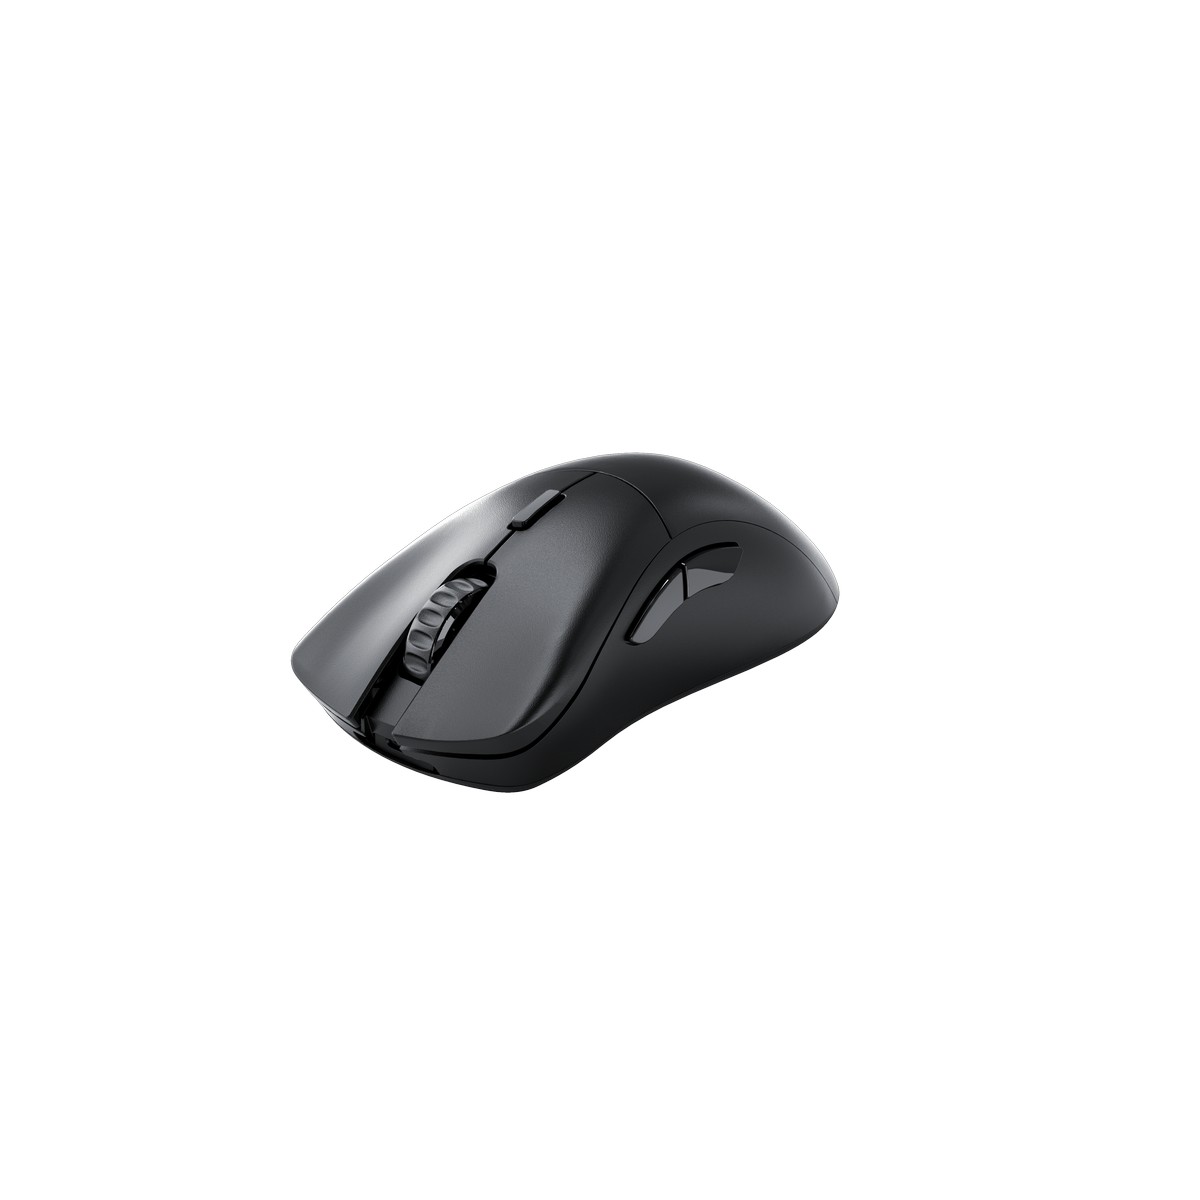 Glorious - Glorious Model D 2 PRO 1K Polling Wireless RGB Gaming Mouse - Black